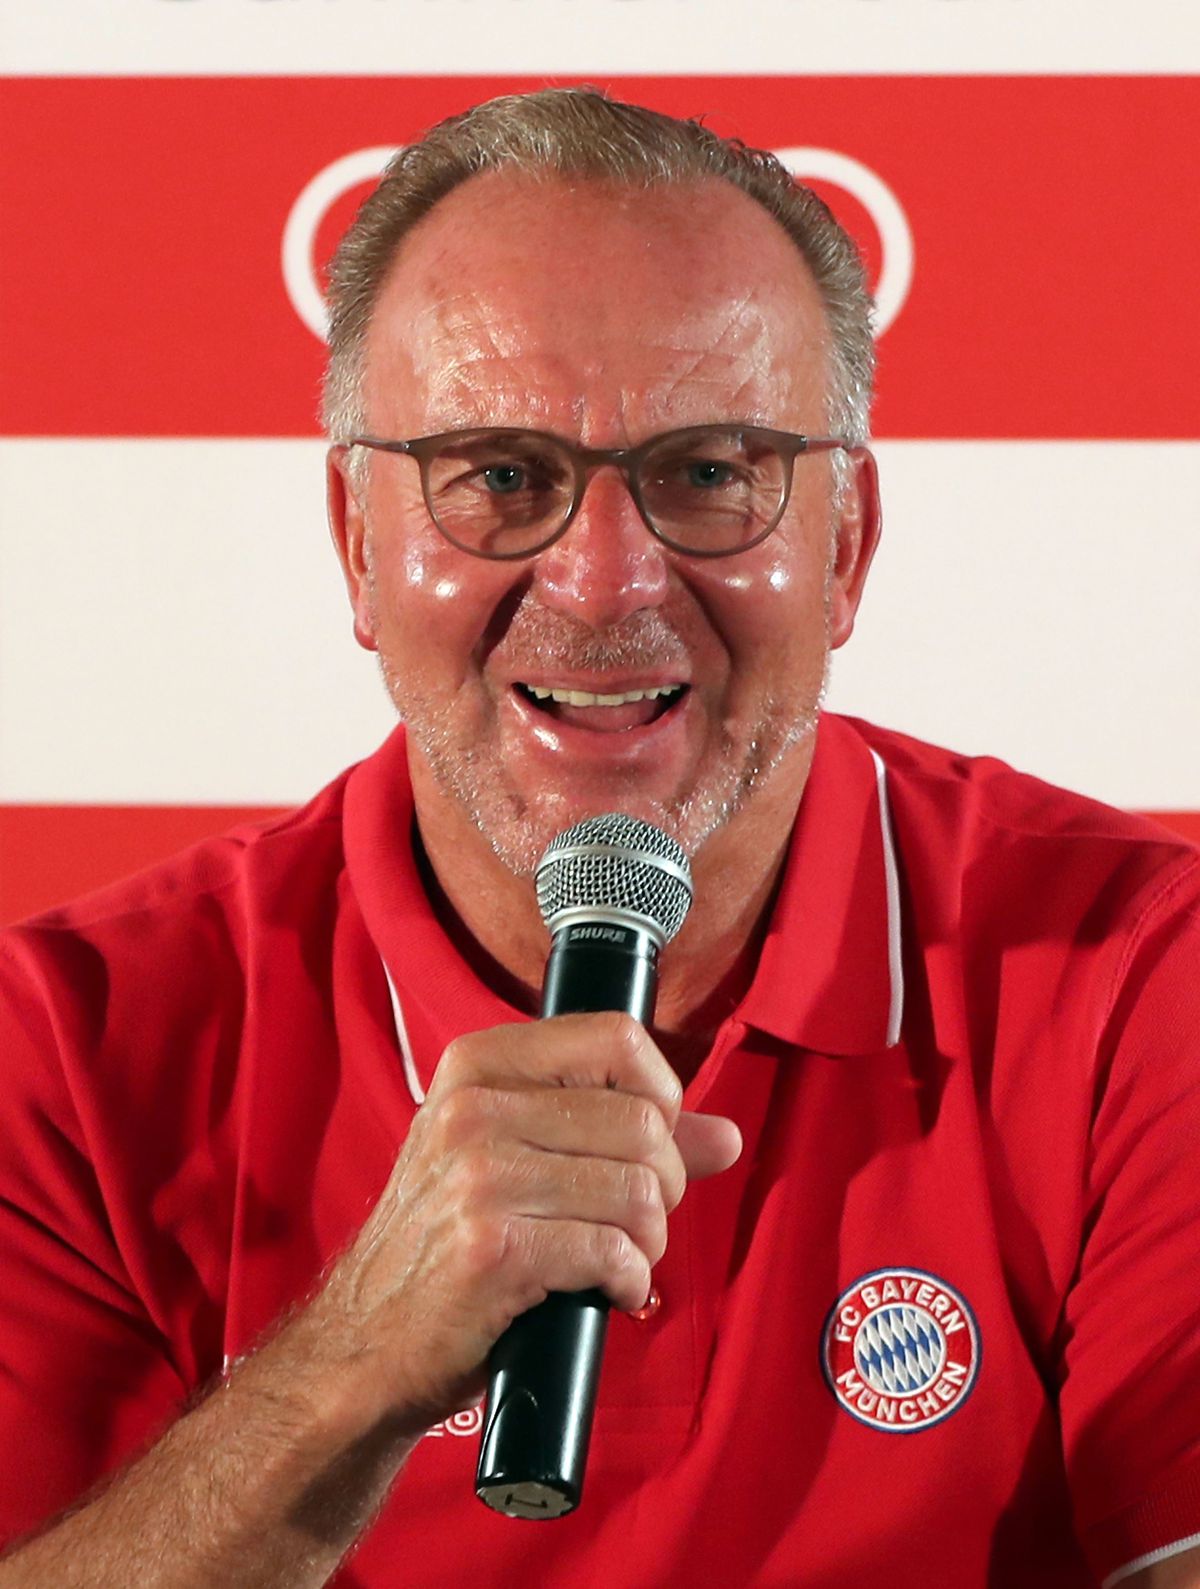 FC Bayern AUDI Summer Tour 2018 - Day 7
MIAMI, FL - JULY 29: Karl-Heinz Rummenigge, CEO of FC Bayern Muenchen, addresses a news conference during the last day of the FC Bayern AUDI Summer Tour on July 29, 2018 at Mandarin Oriental hotel in Miami, Florida.